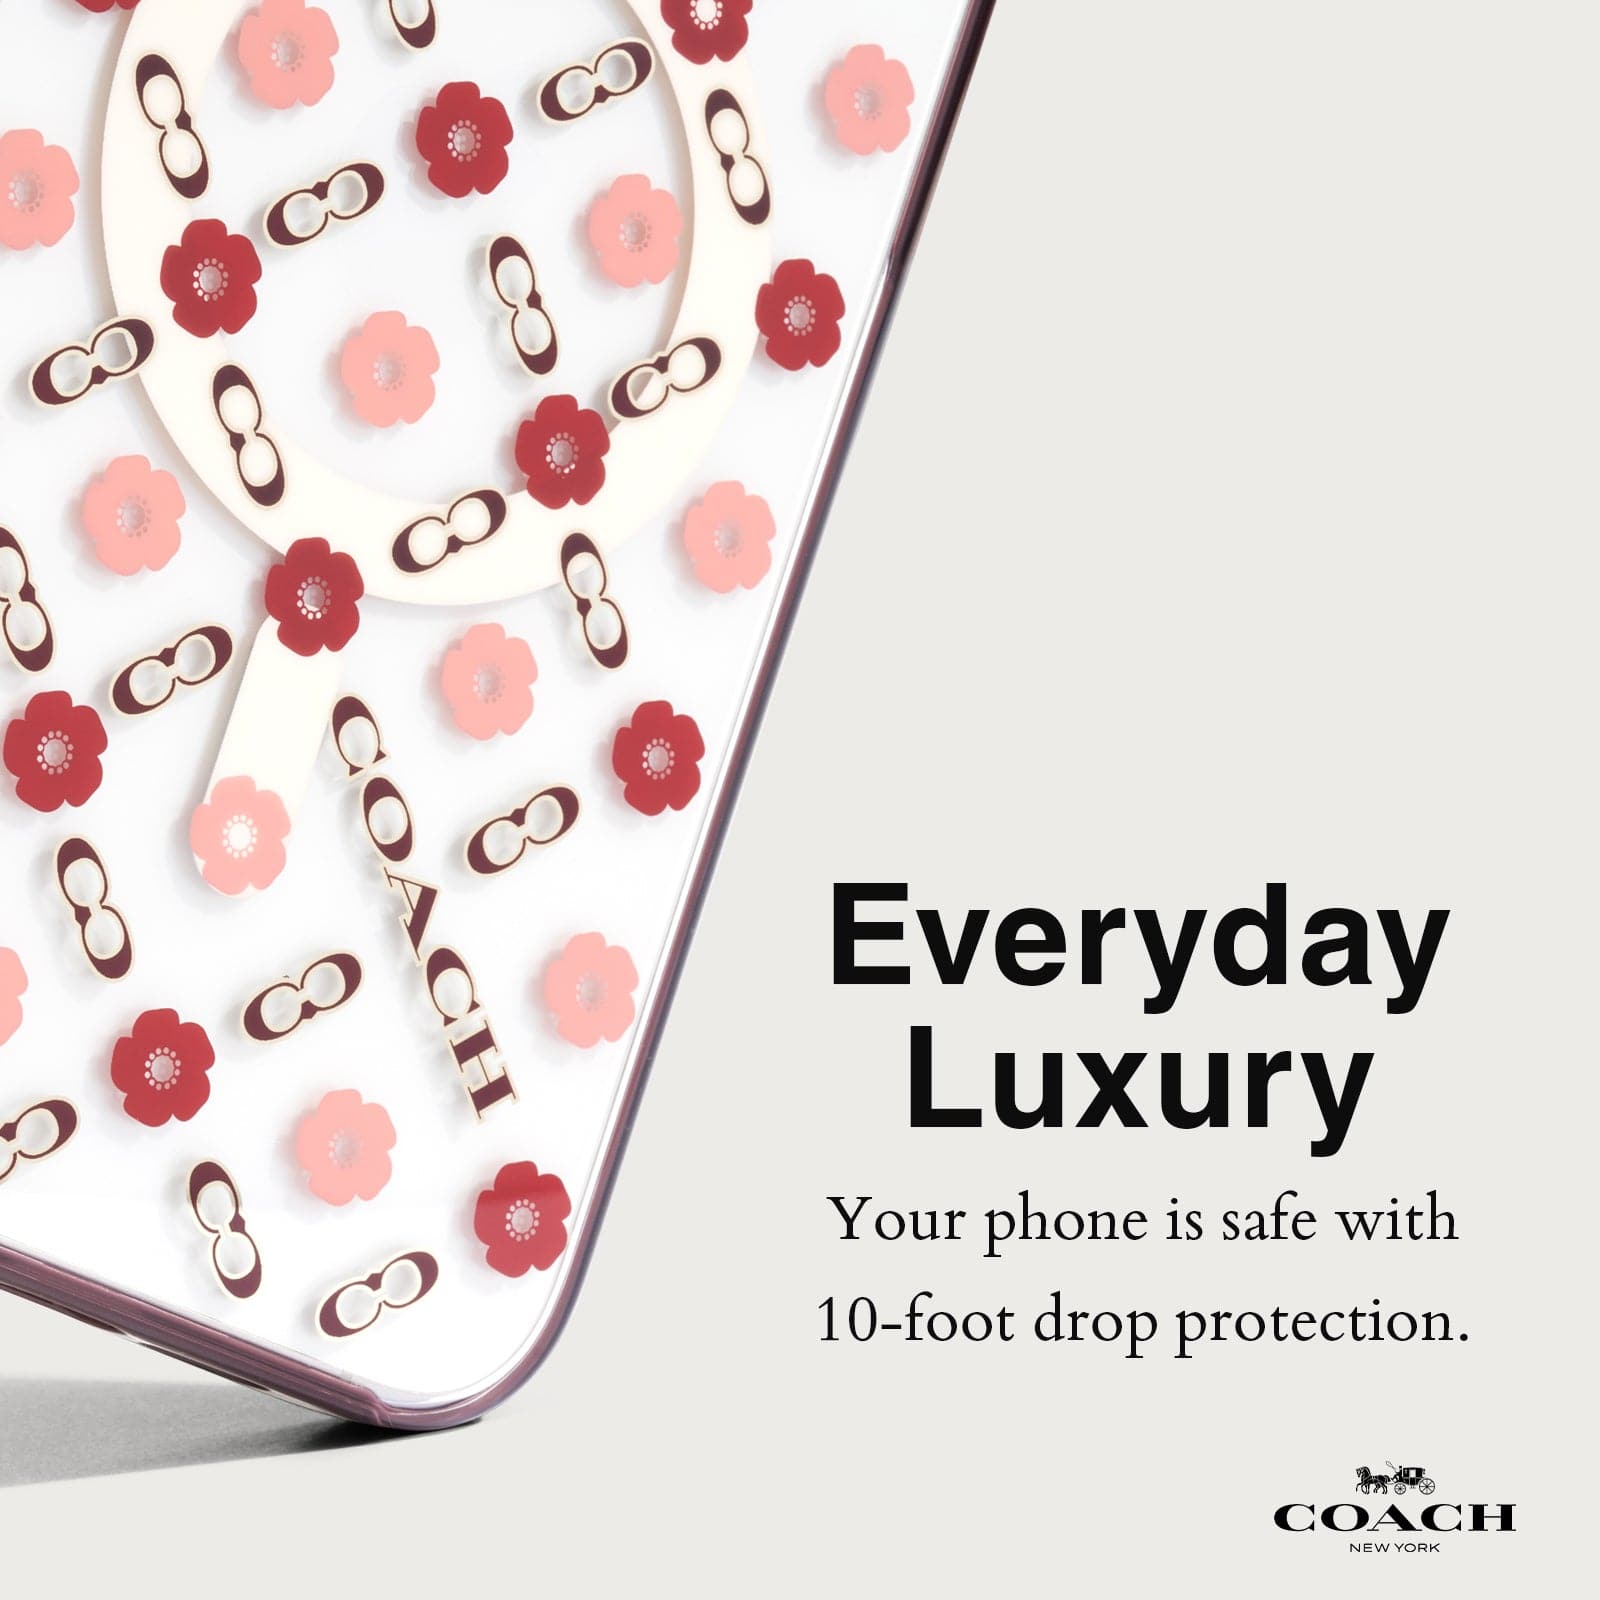 EVERYDAY LUXURY. YOUR PHONE IS SAFE WITH 10FOOT DROP PROTECTION